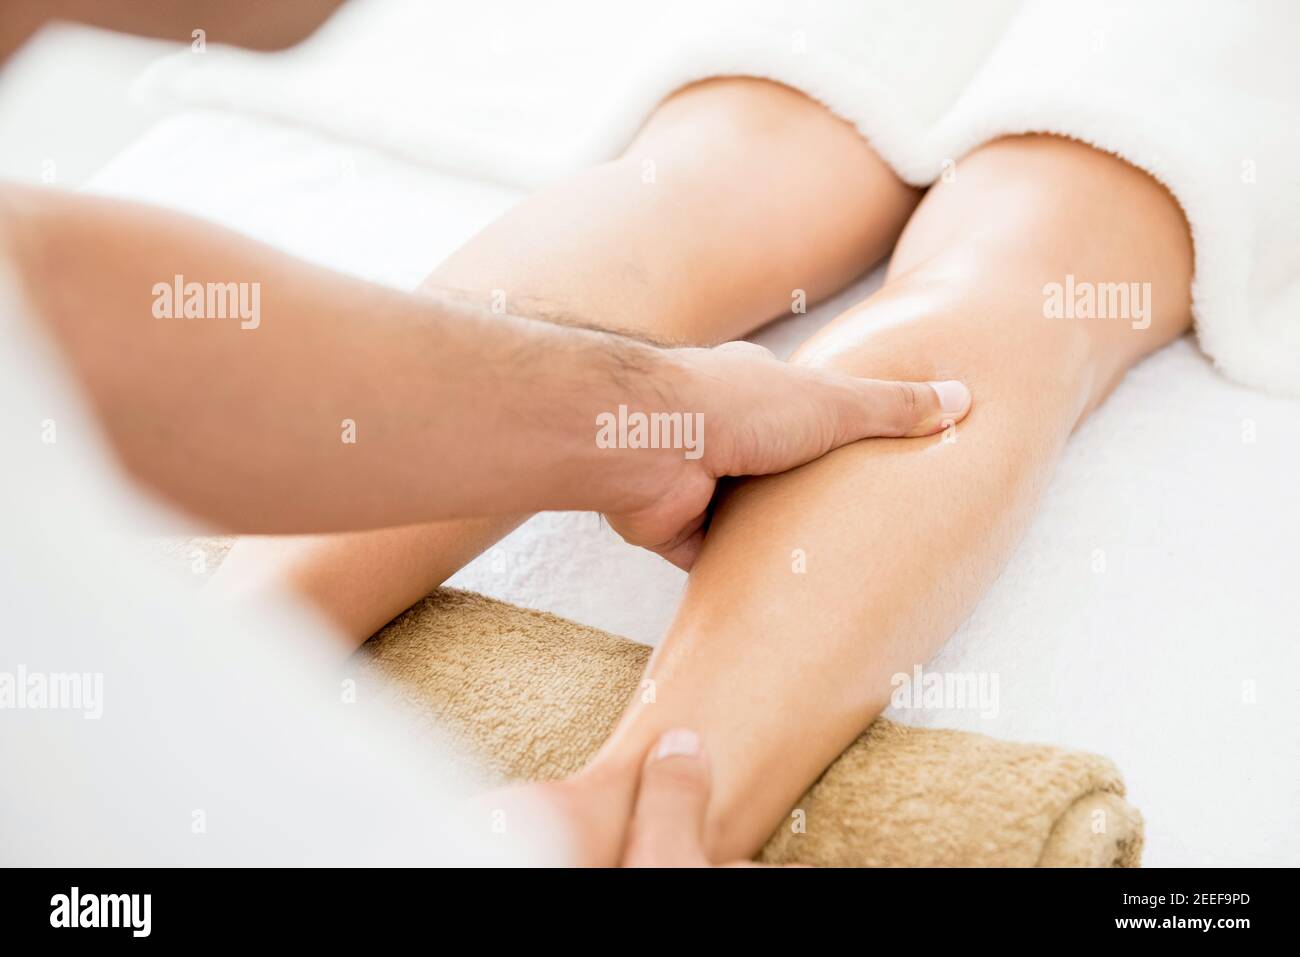 Male therapist (masseur) giving leg massage to a woman in spa Stock Photo